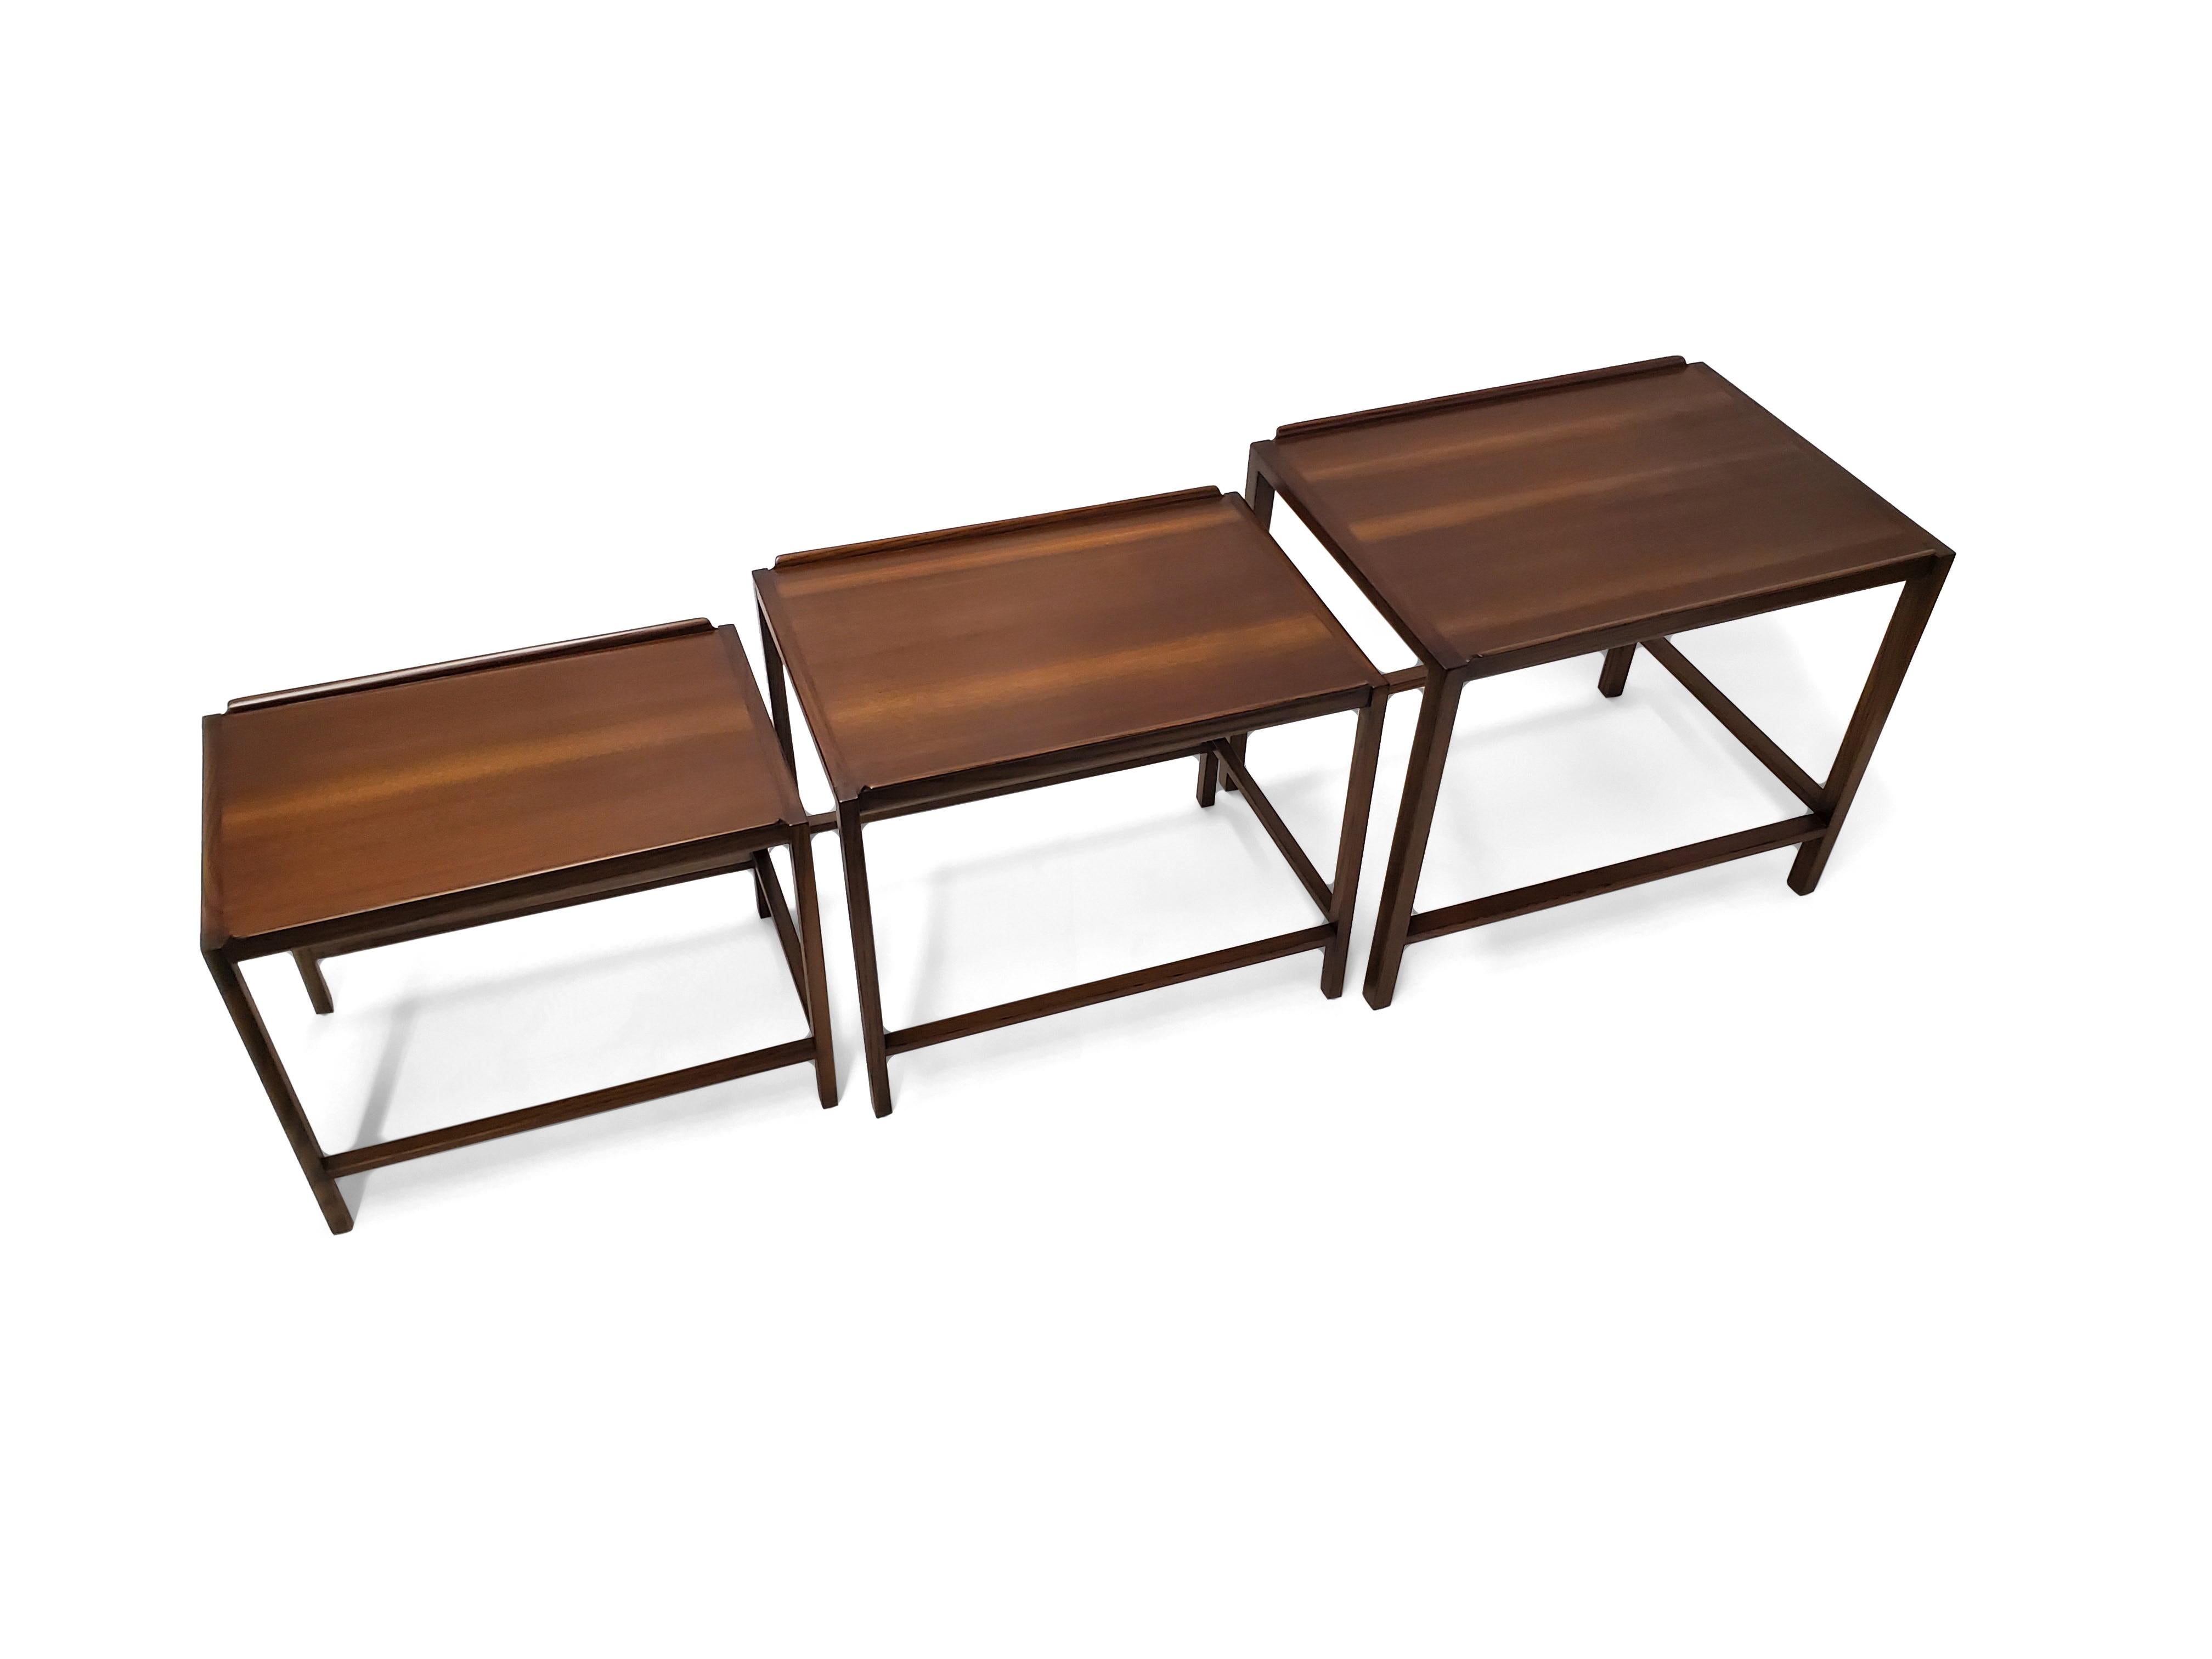 American Set of Three Edward Wormley for Dunbar Nesting Tables For Sale